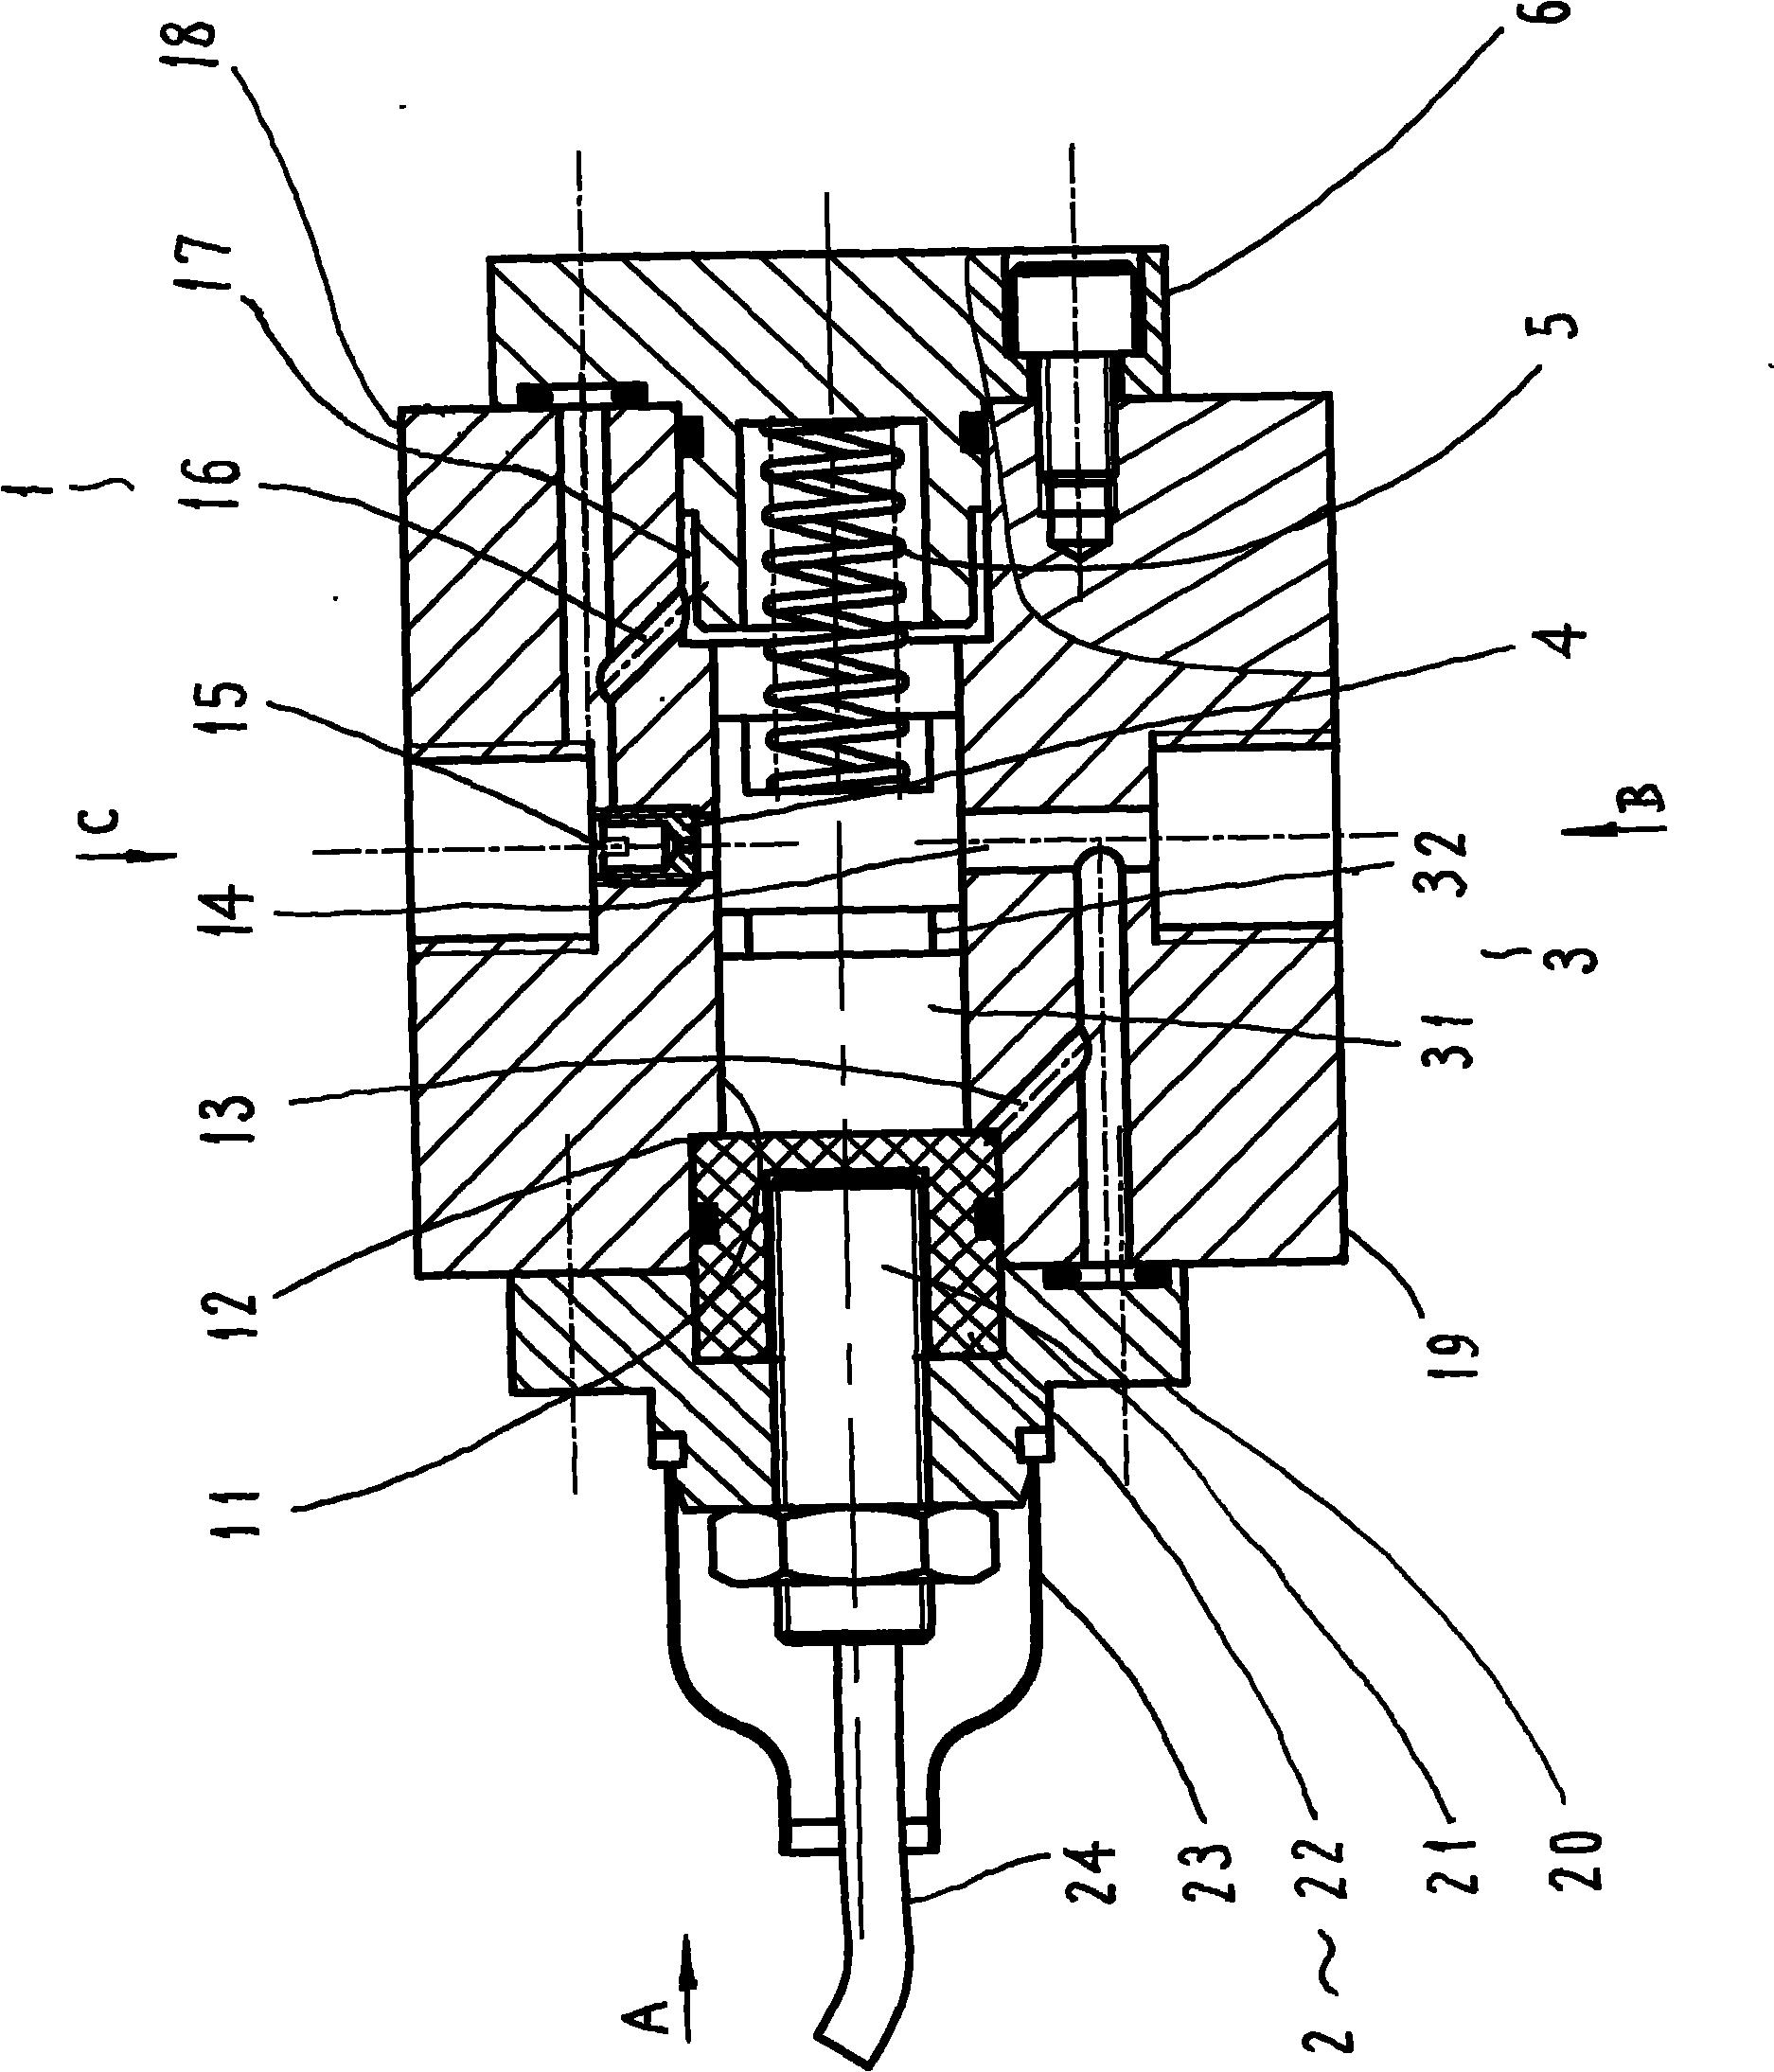 Pressure induction type flow switch